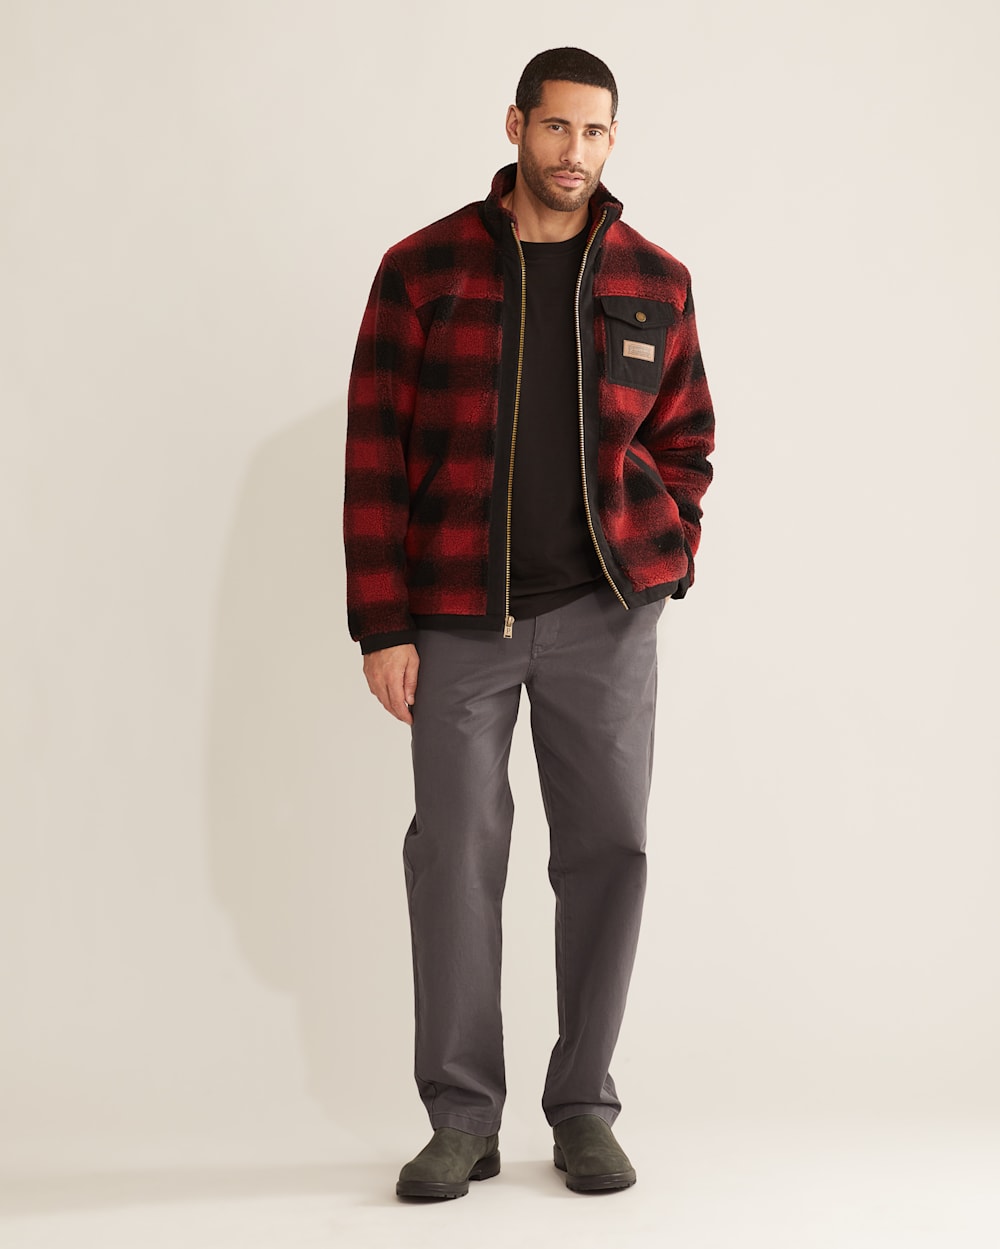 ALTERNATE VIEW OF MEN'S LONE FIR STAND-COLLAR FLEECE JACKET IN RED BUFFALO CHECK image number 6